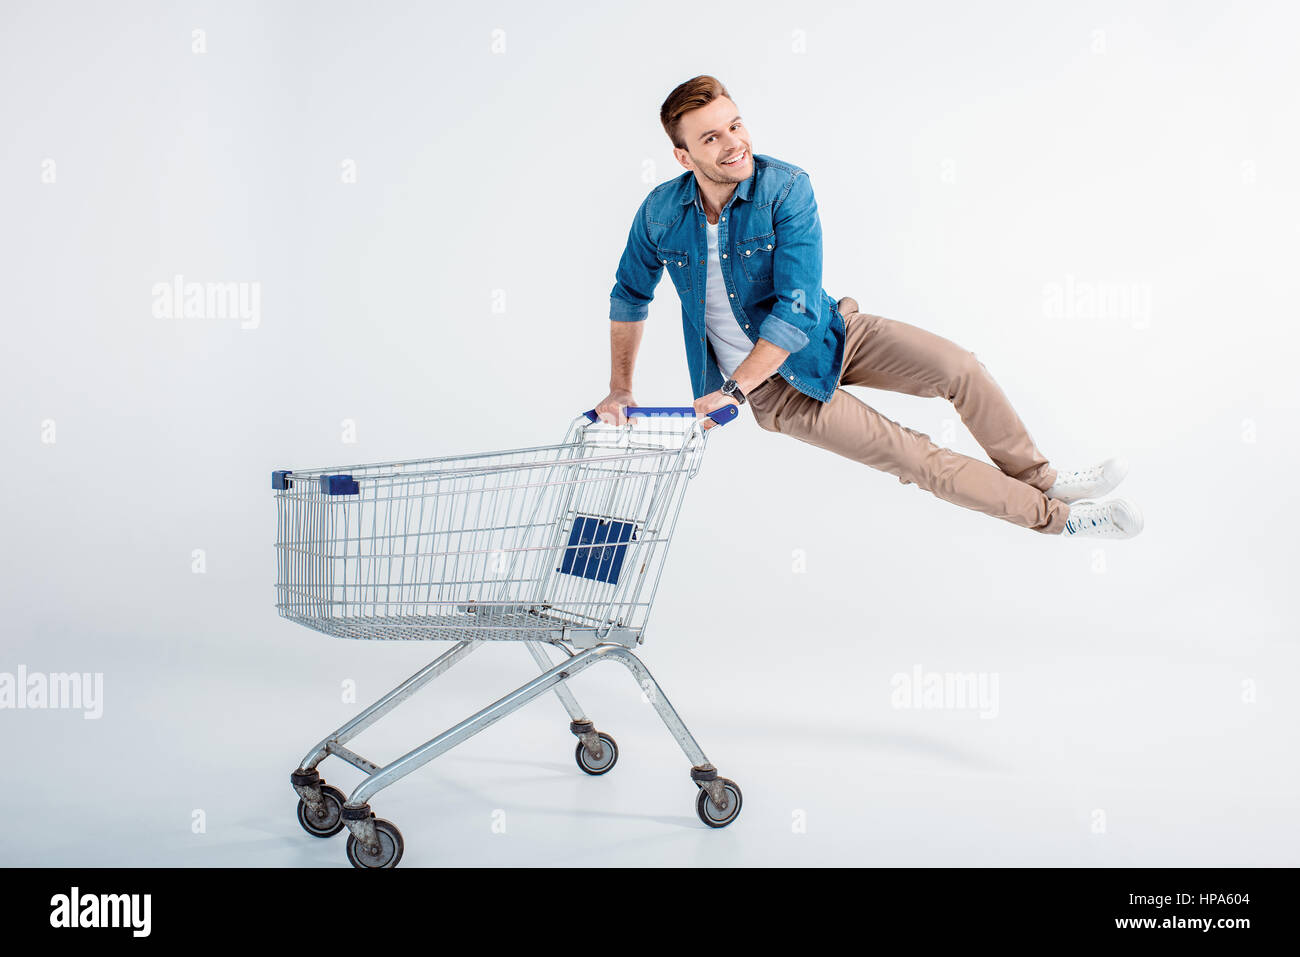 man jumping and having fun with shopping trolley on white Stock Photo